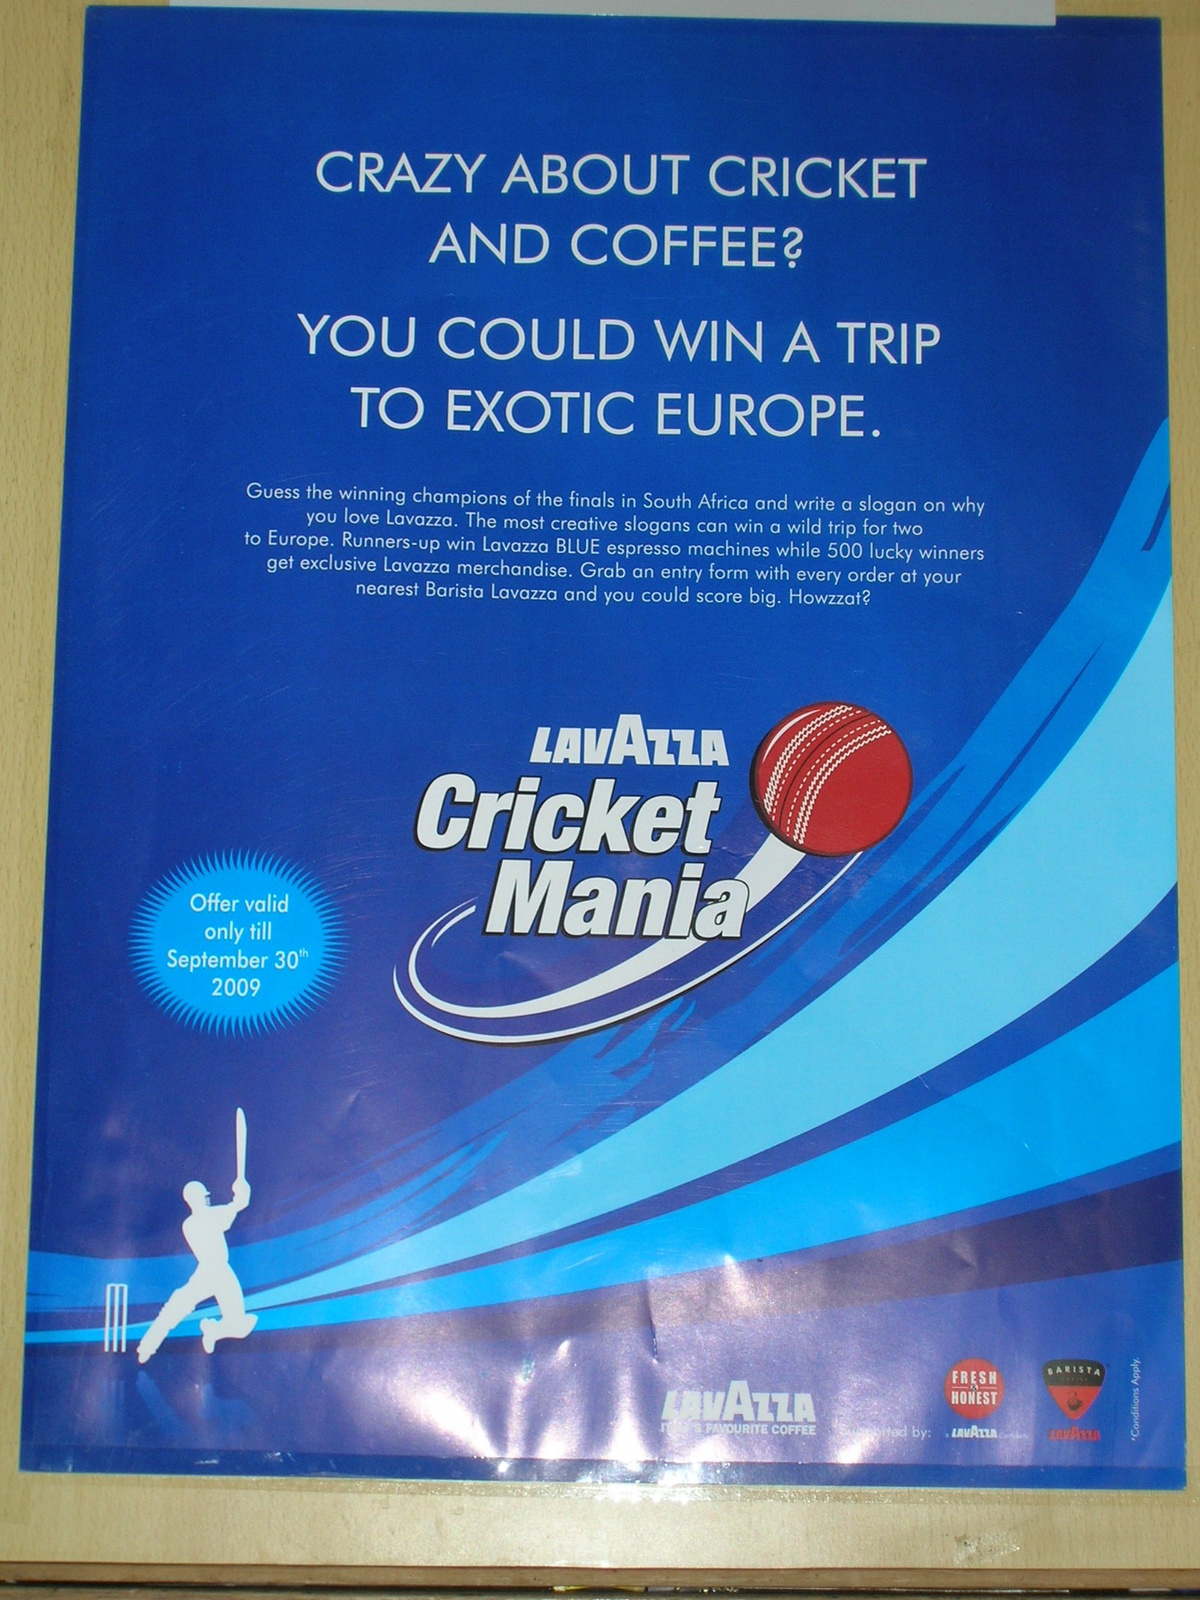 For anybody interested in winning a trip to exotic Europe